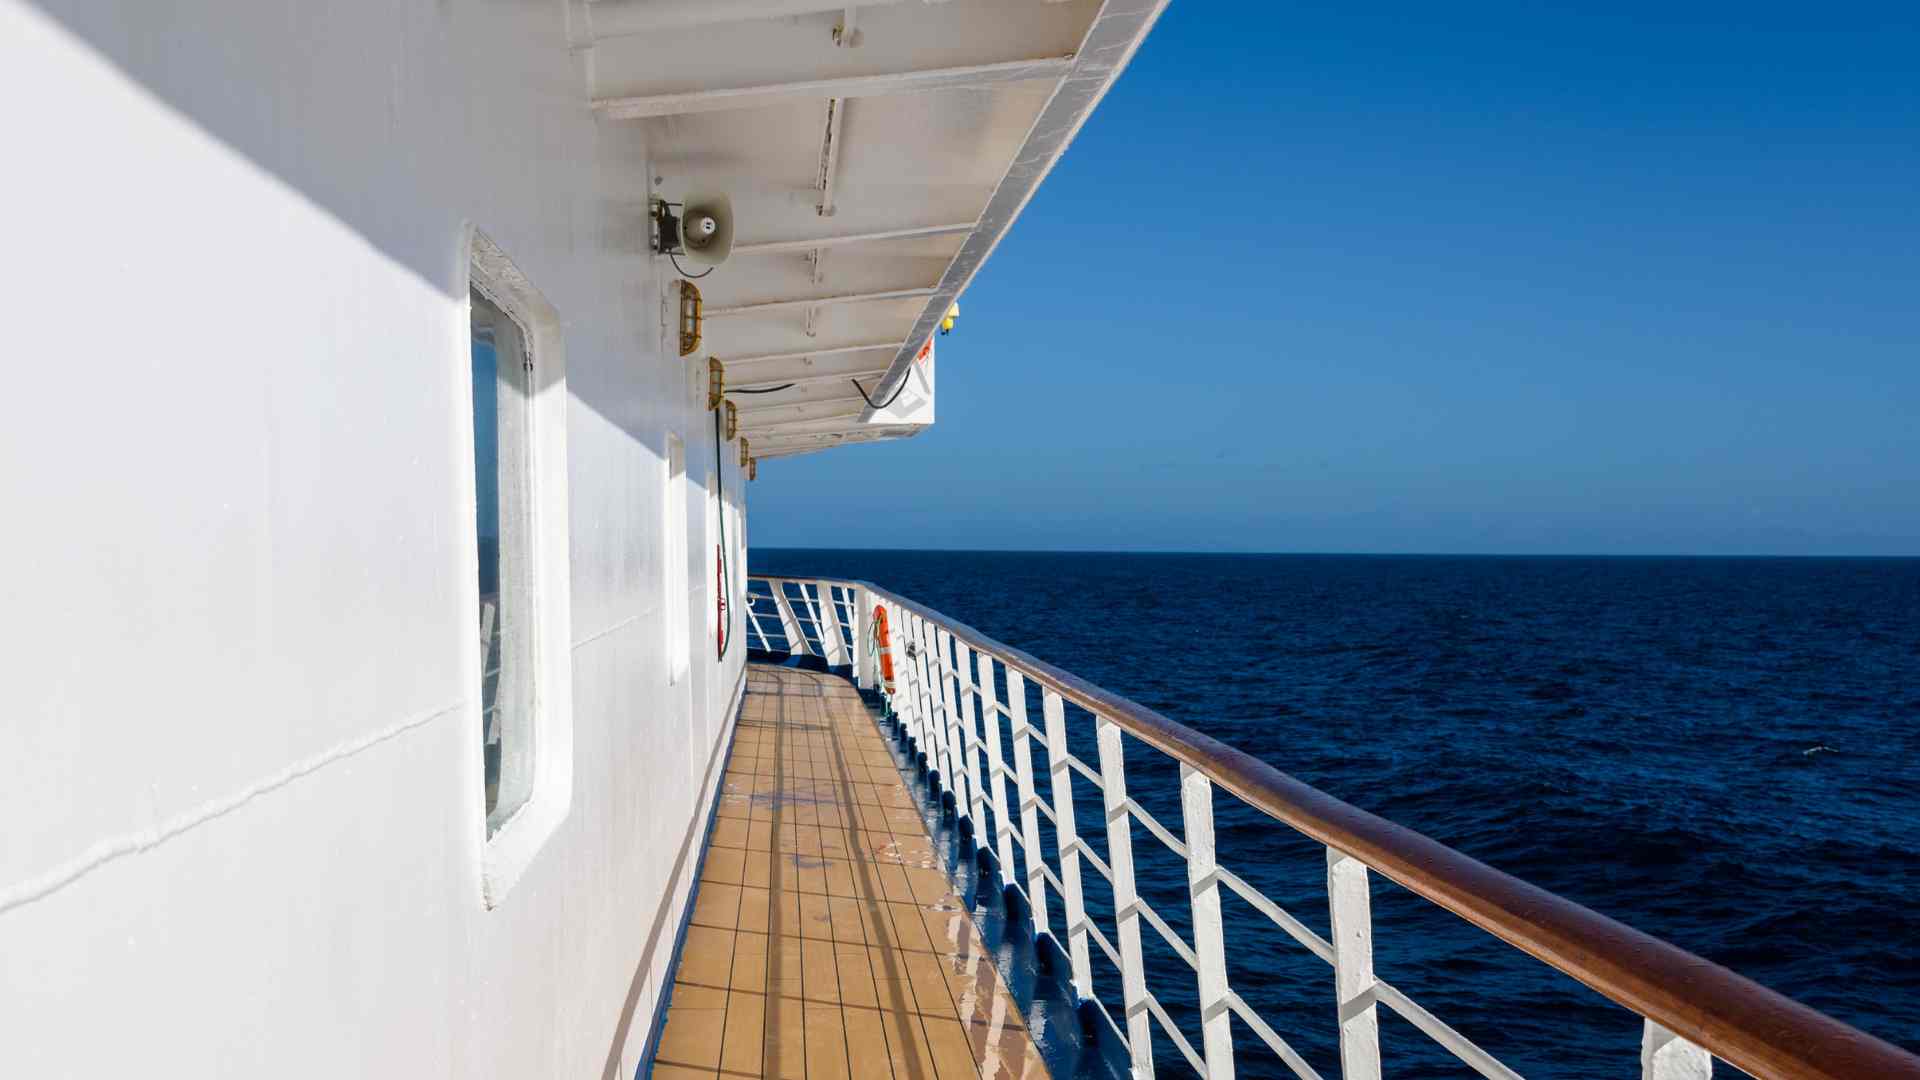 Cruise Line for December Voyages